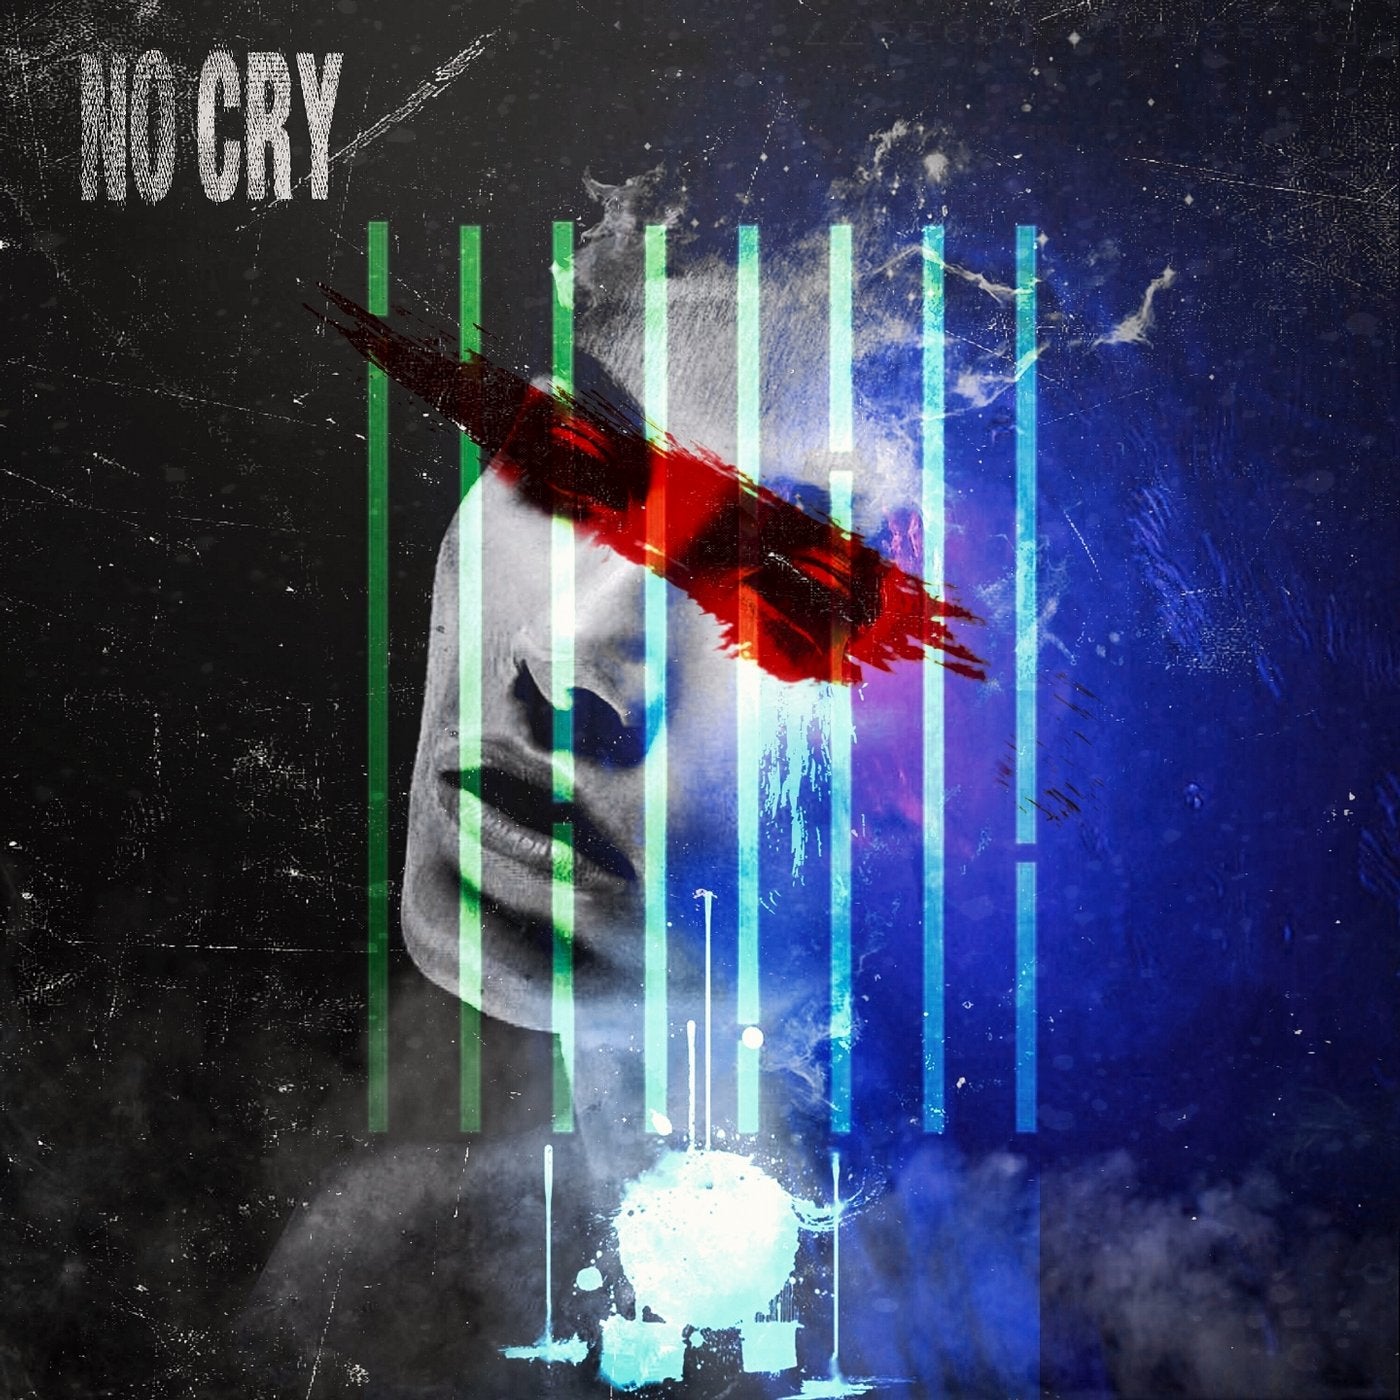 No Cry (feat. ???? ????????)